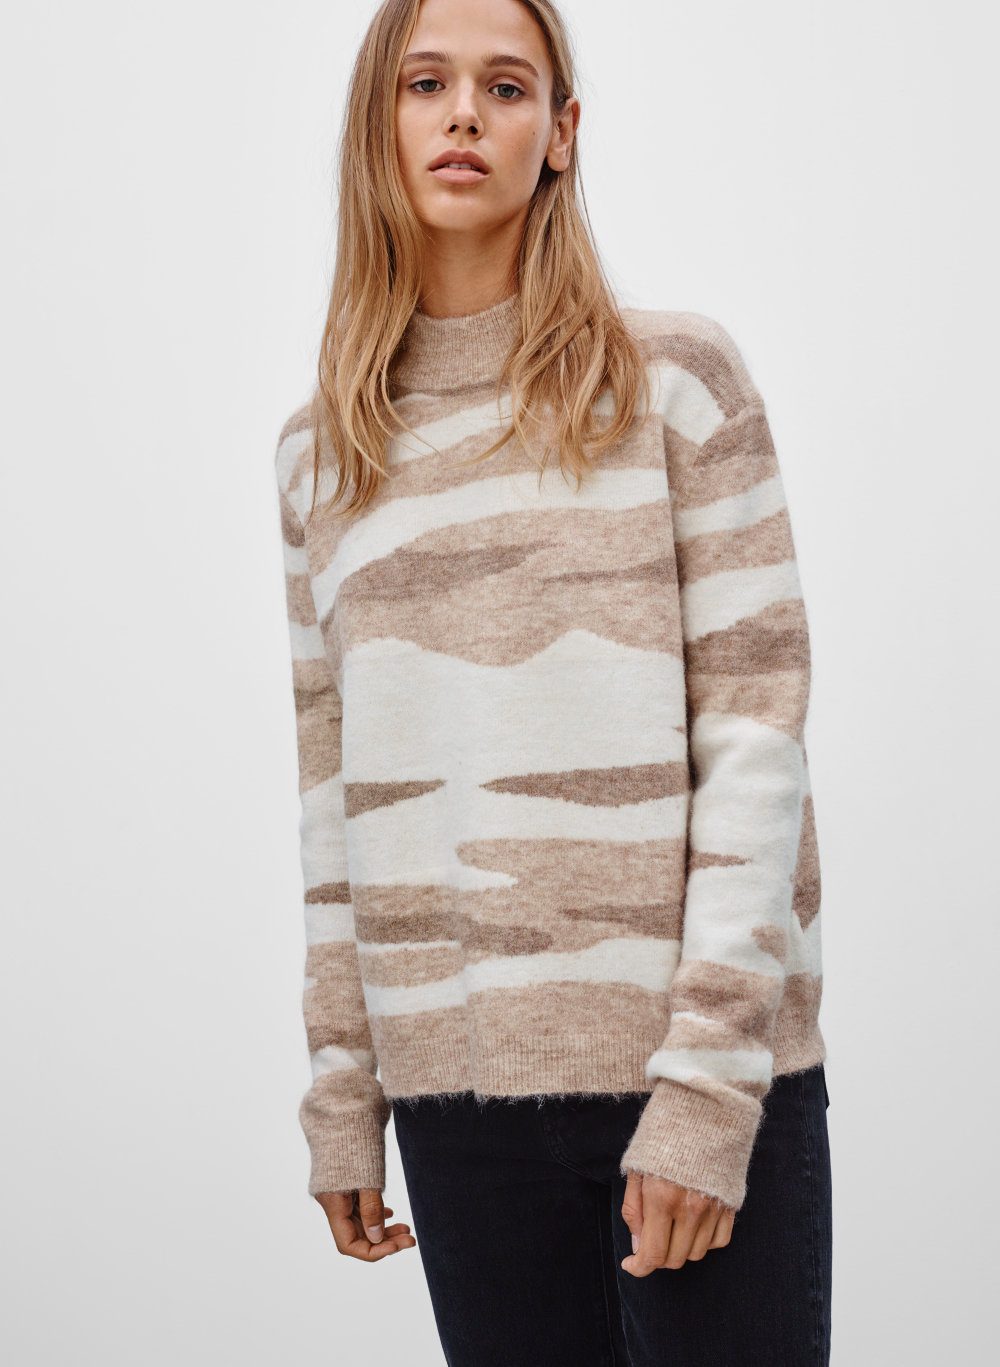 Wilfred Free MARION SWEATER | Aritzia